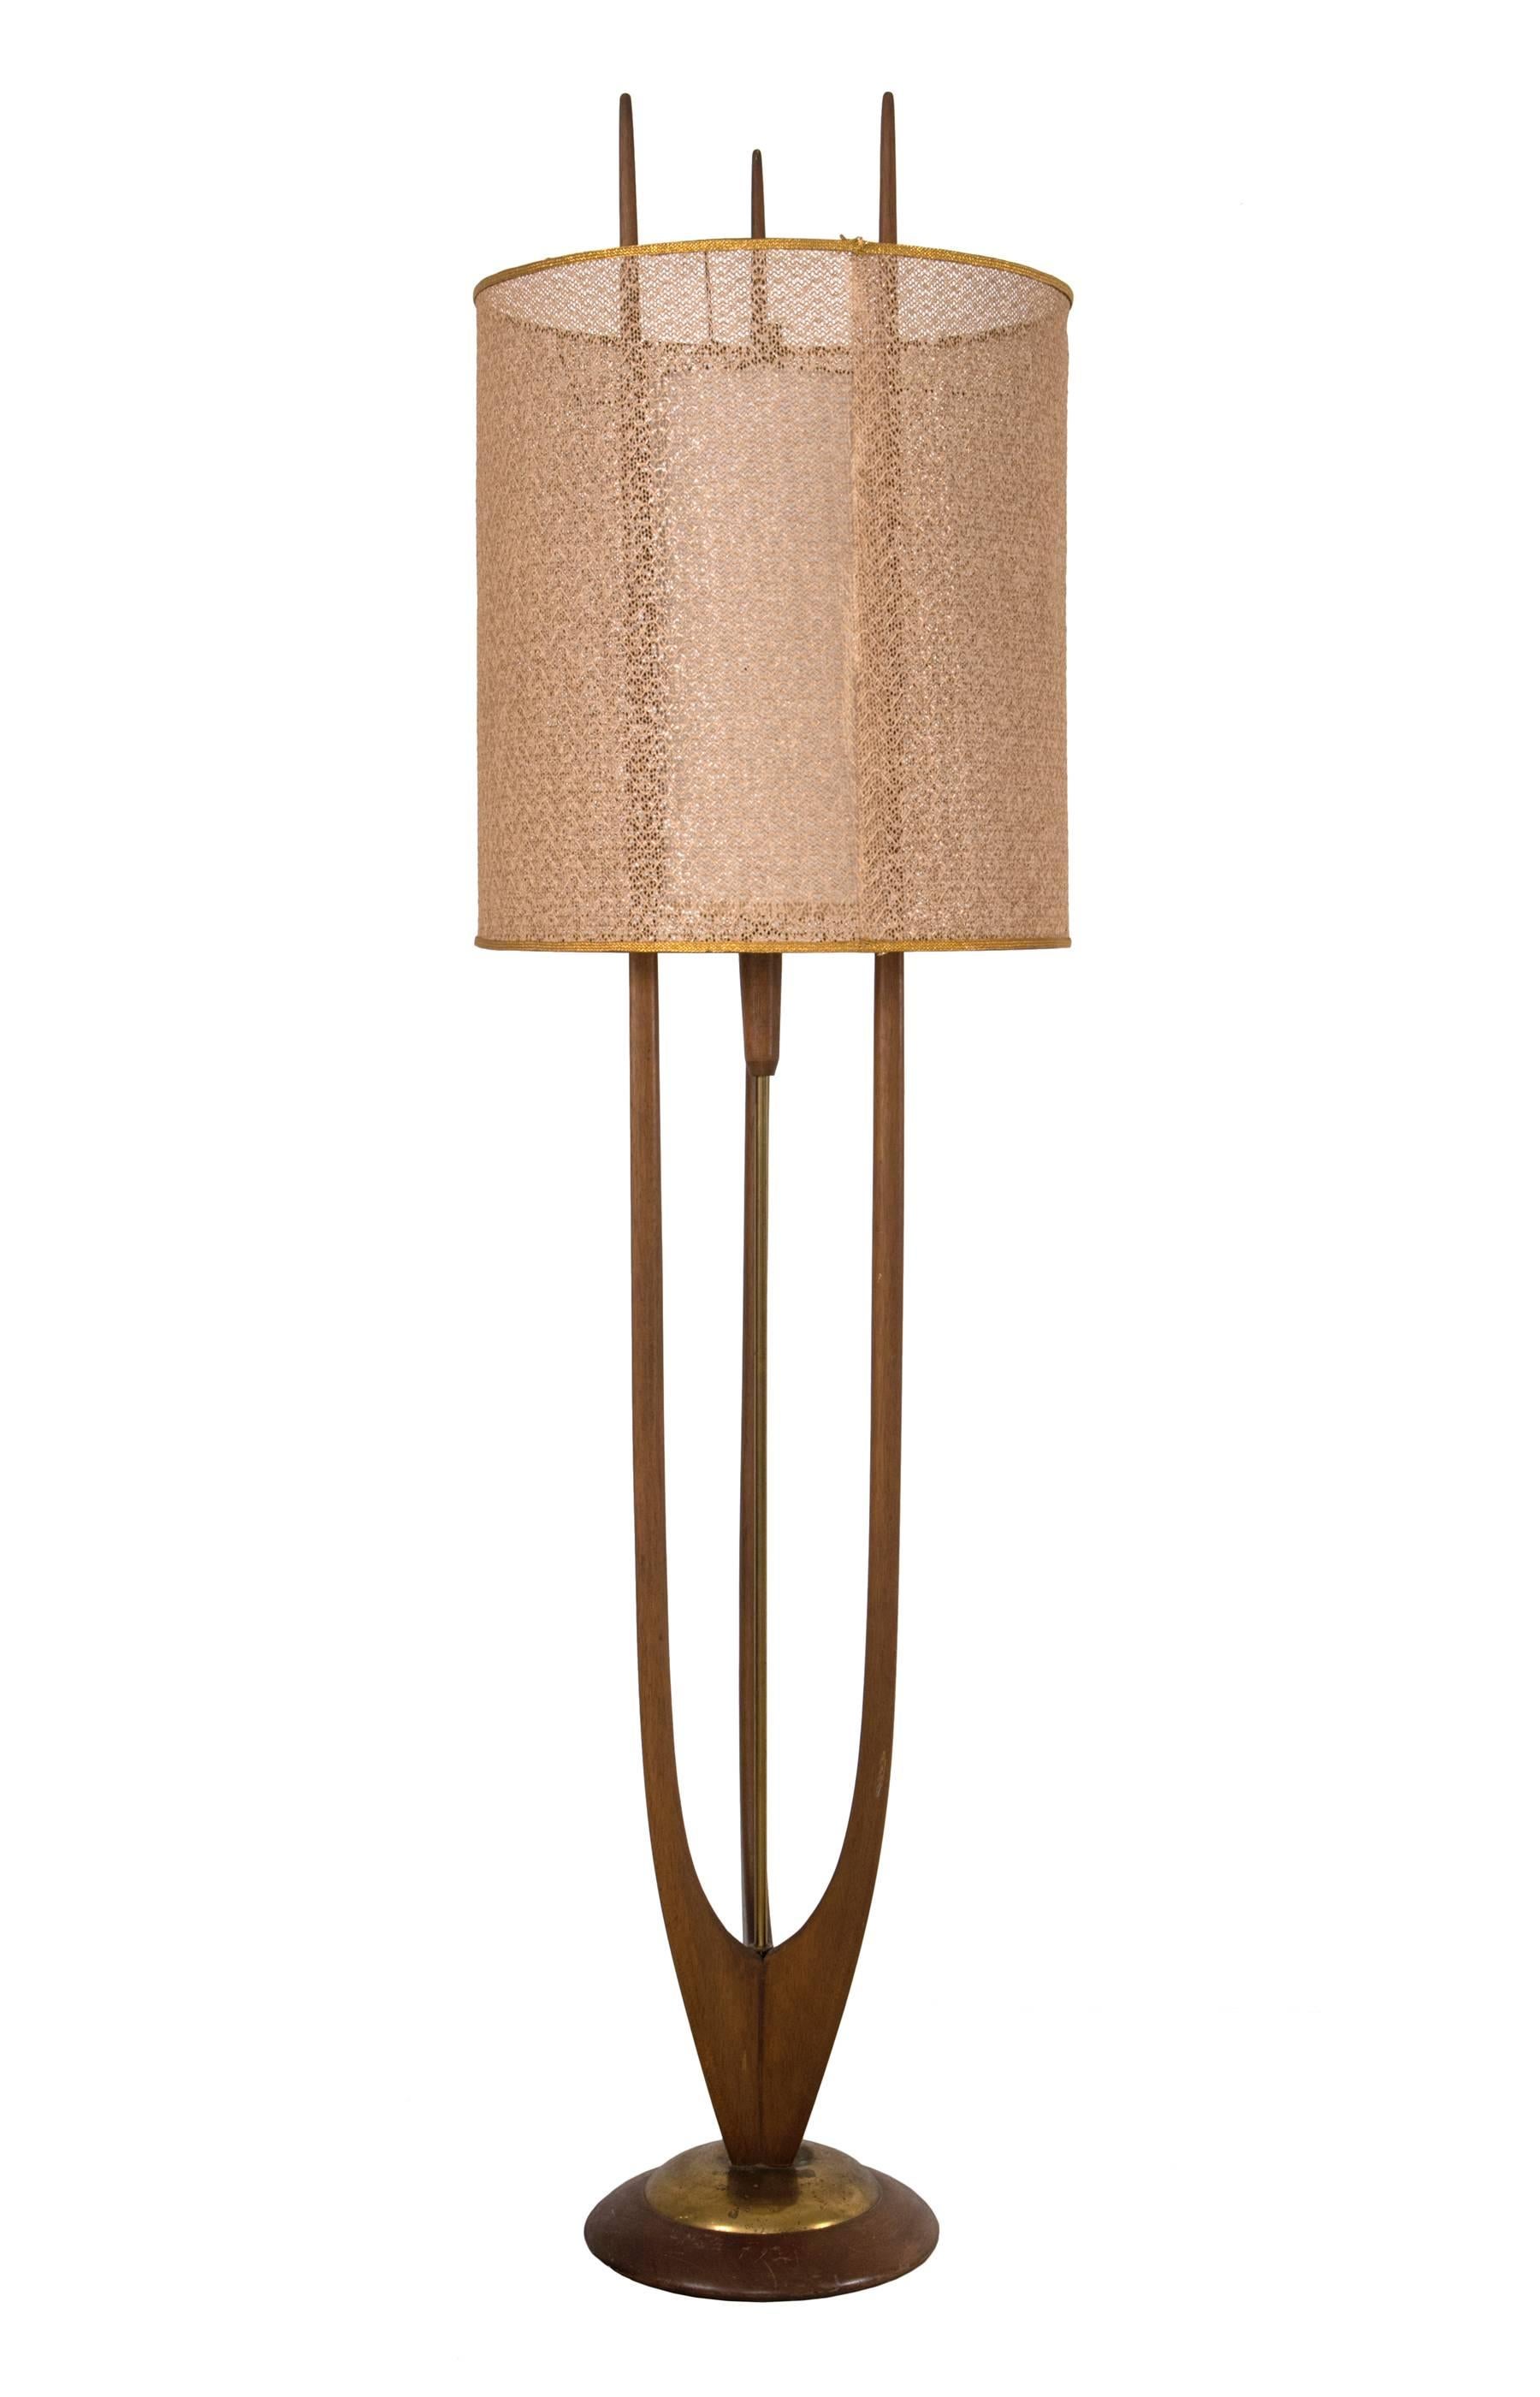 Nice Modeline floor lamp in excellent vintage condition. We had a shade made for the diffuser. The outer shade is original. Note some discoloration to brass on the base. Could probably be cleaned.